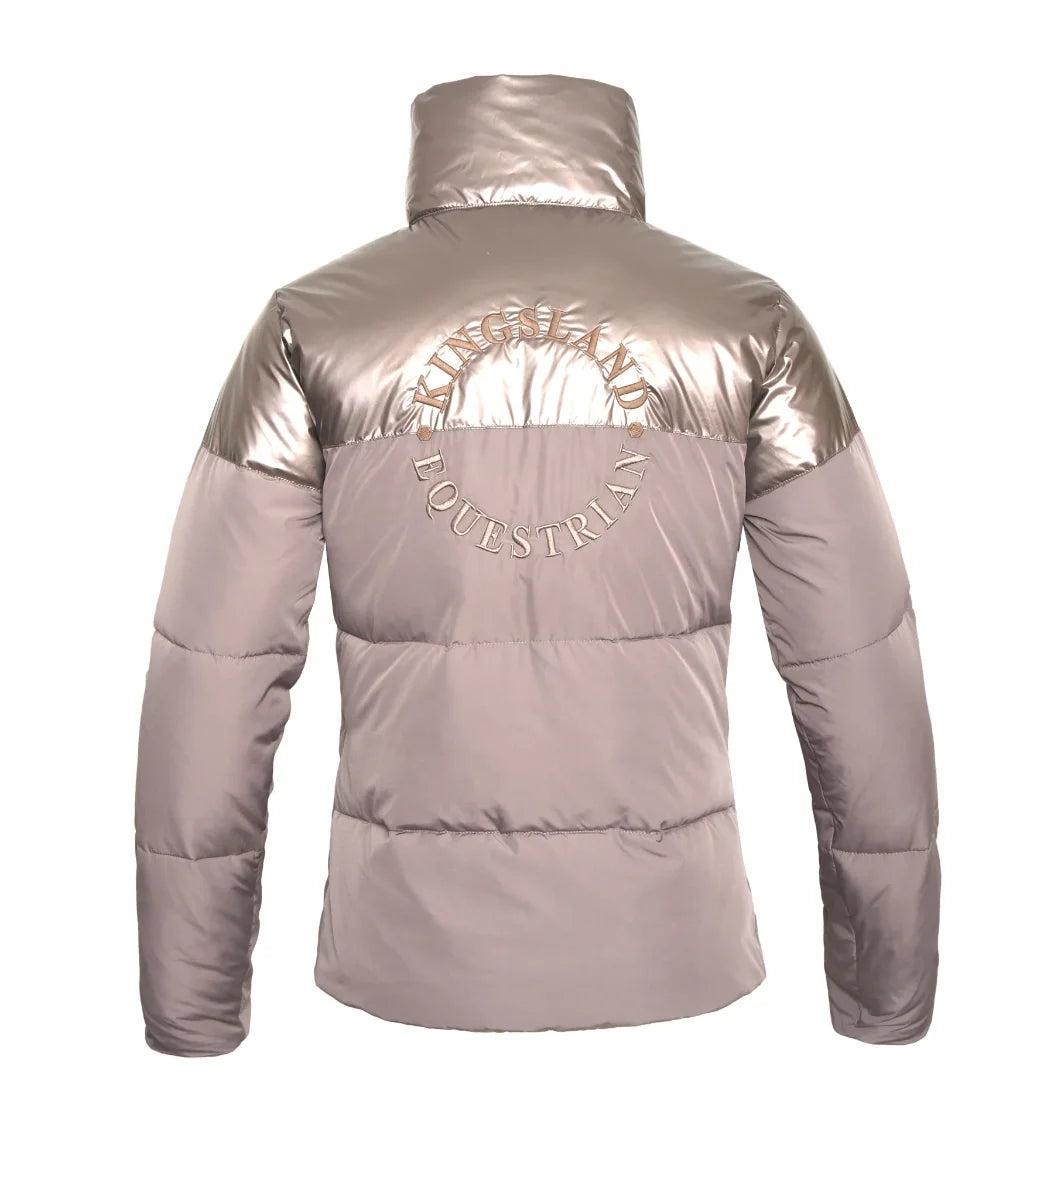 Kingsland Stacy Ladies Insulated Jacket - S - New!